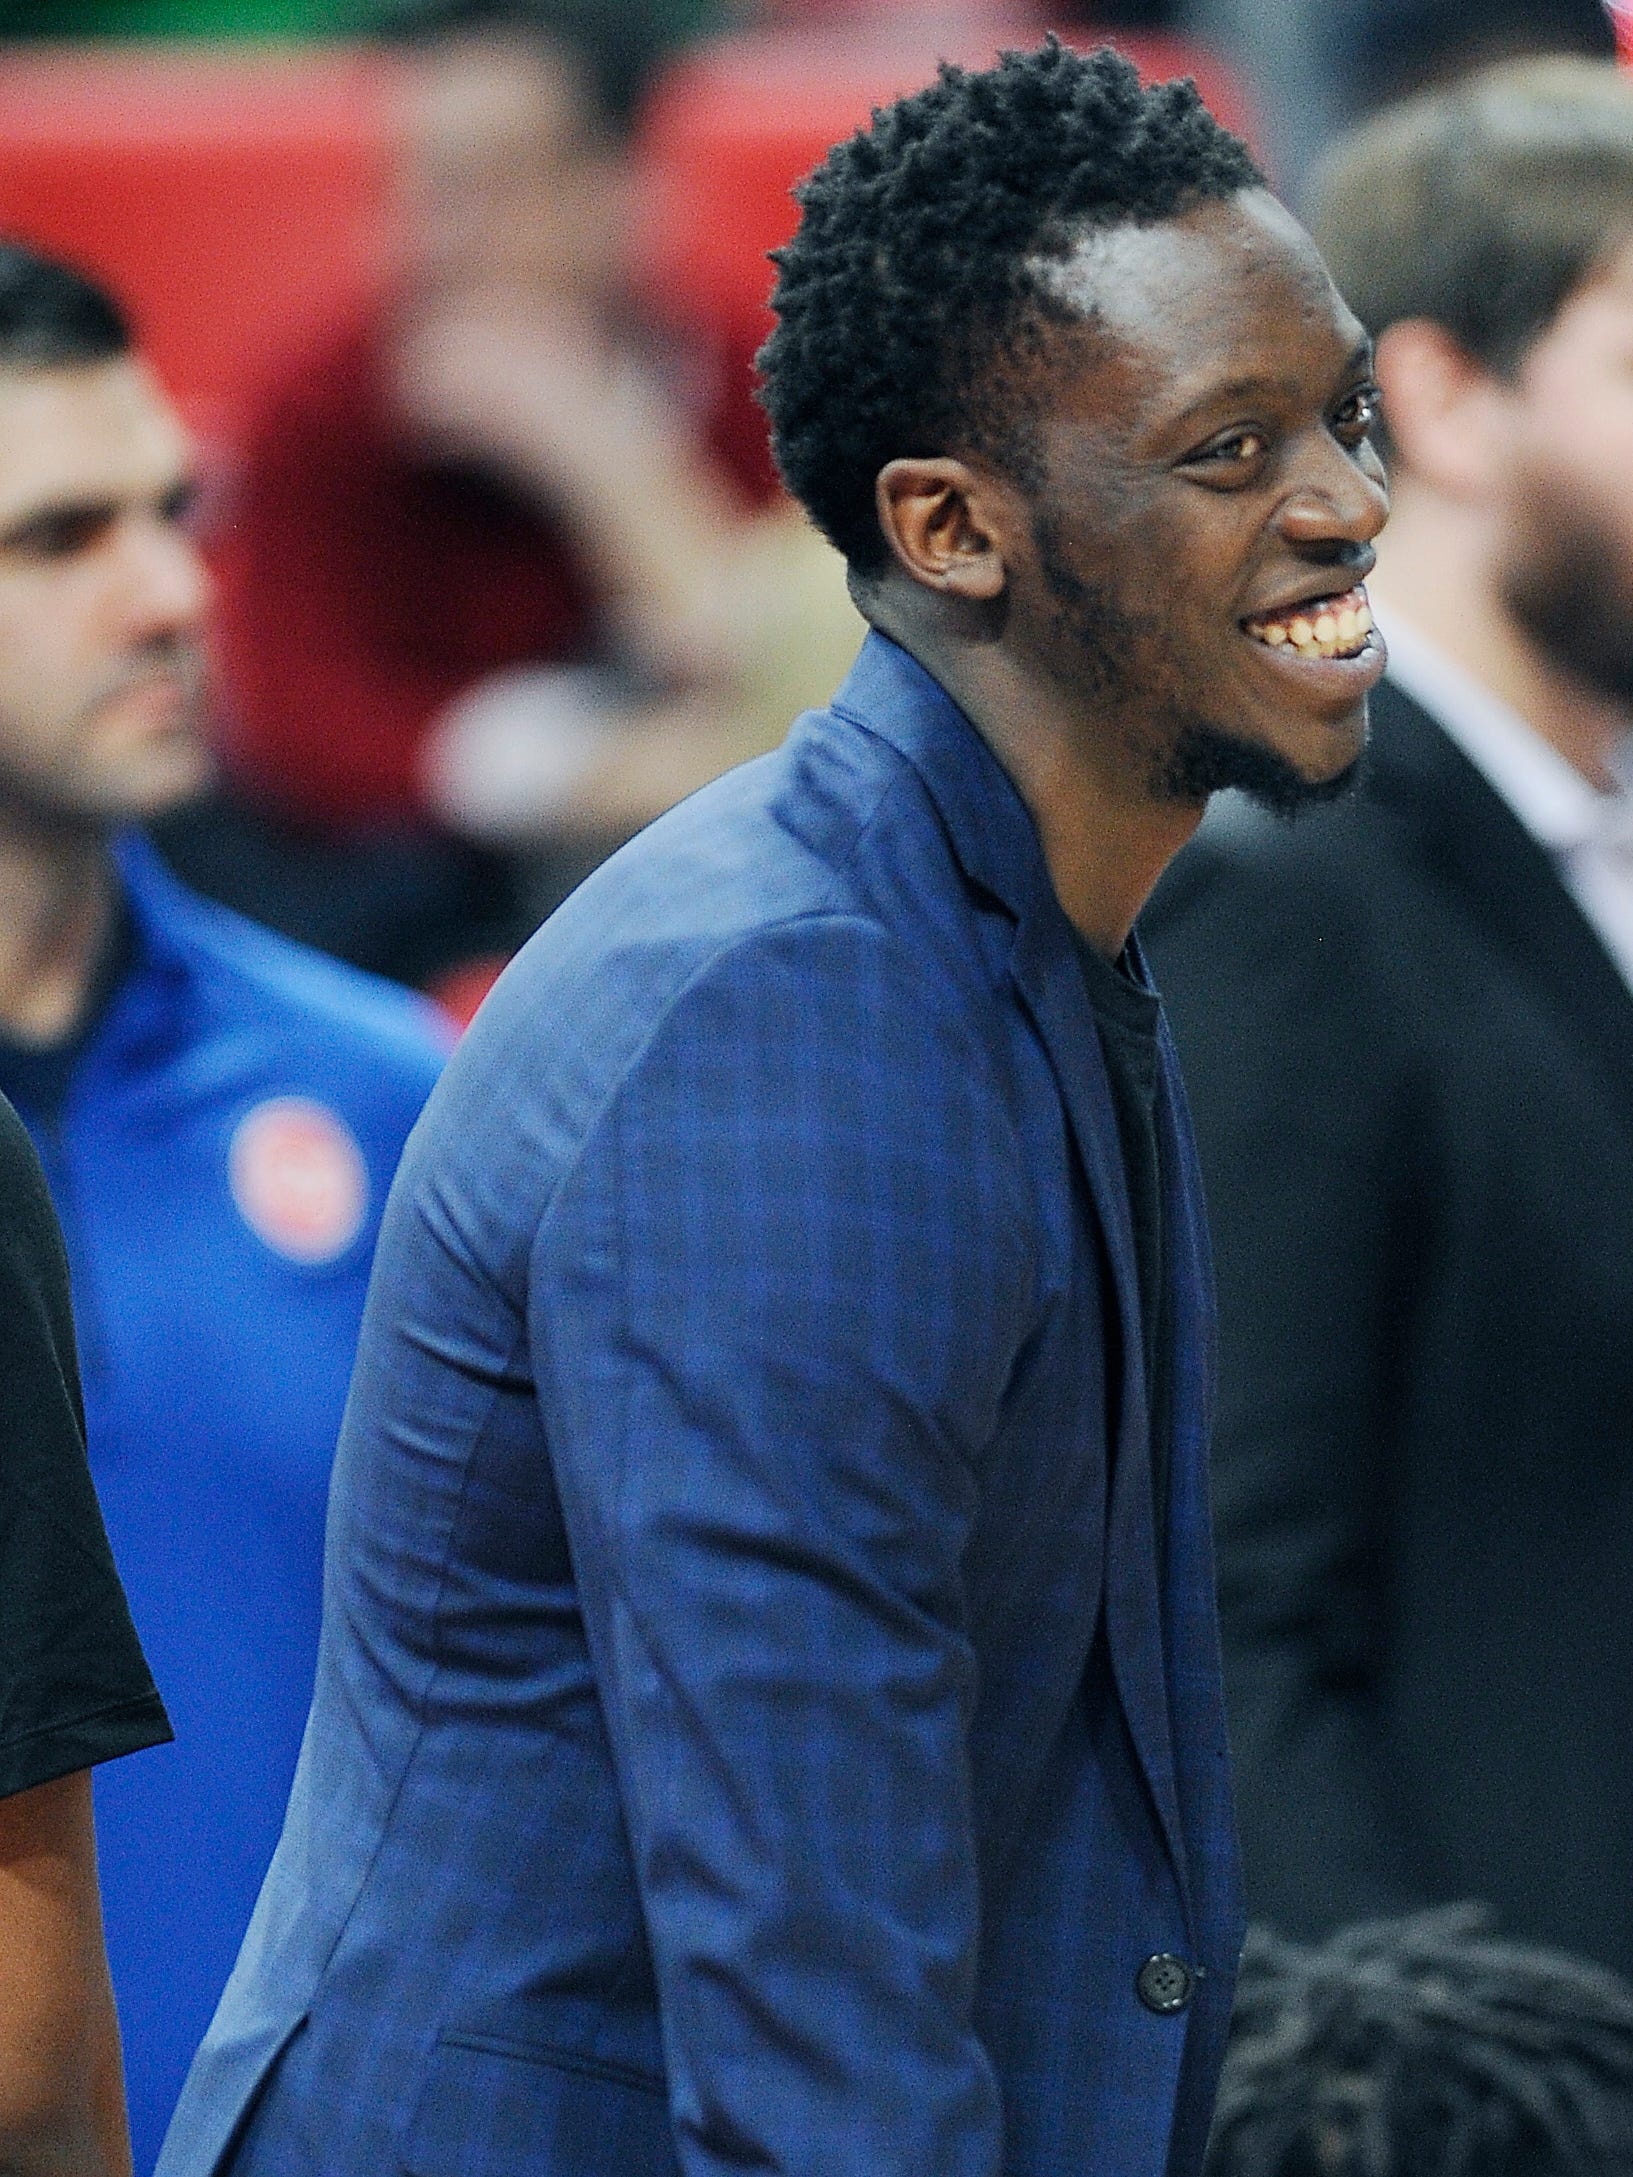 Pistons' injured guard Reggie Jackson chat with teammates during a timeout in the second quarter.